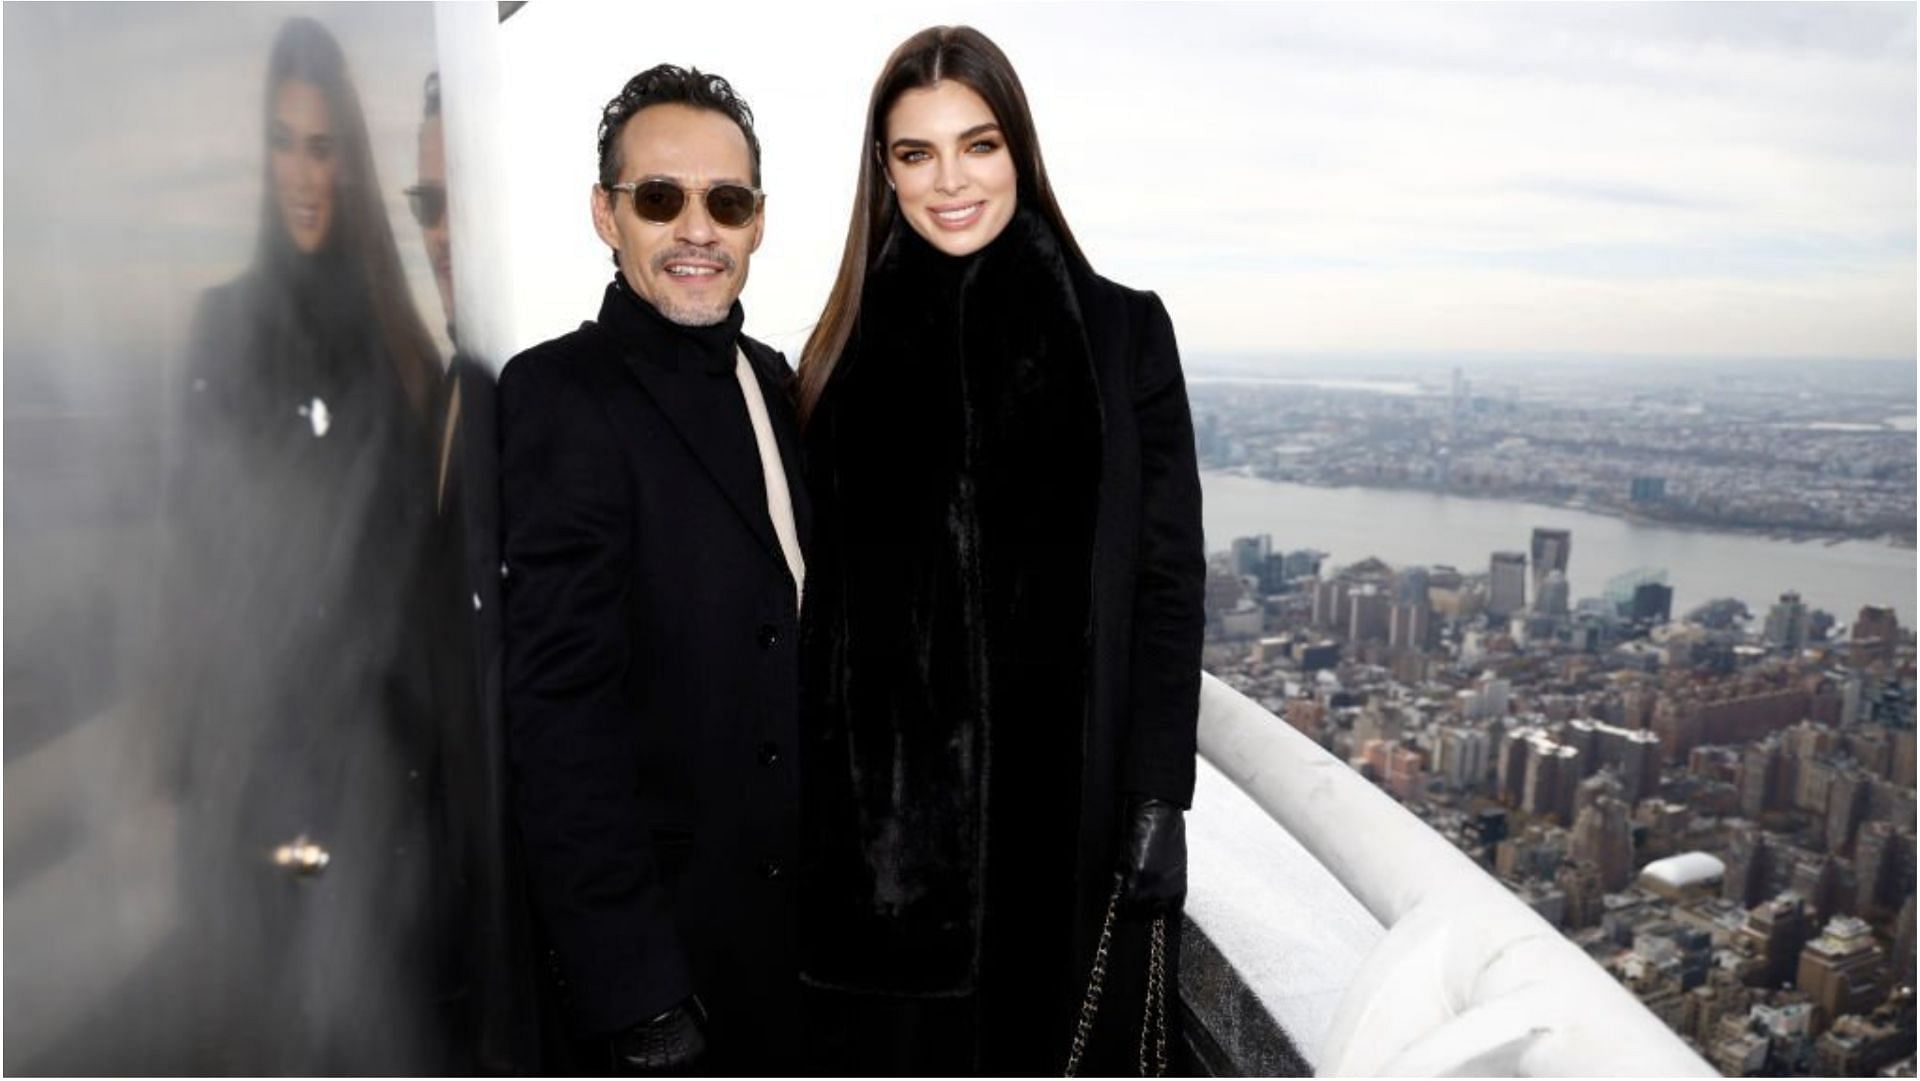 Marc Anthony and Nadia Ferreira recently tied the knot (Image via John Lamparski/Getty Images)